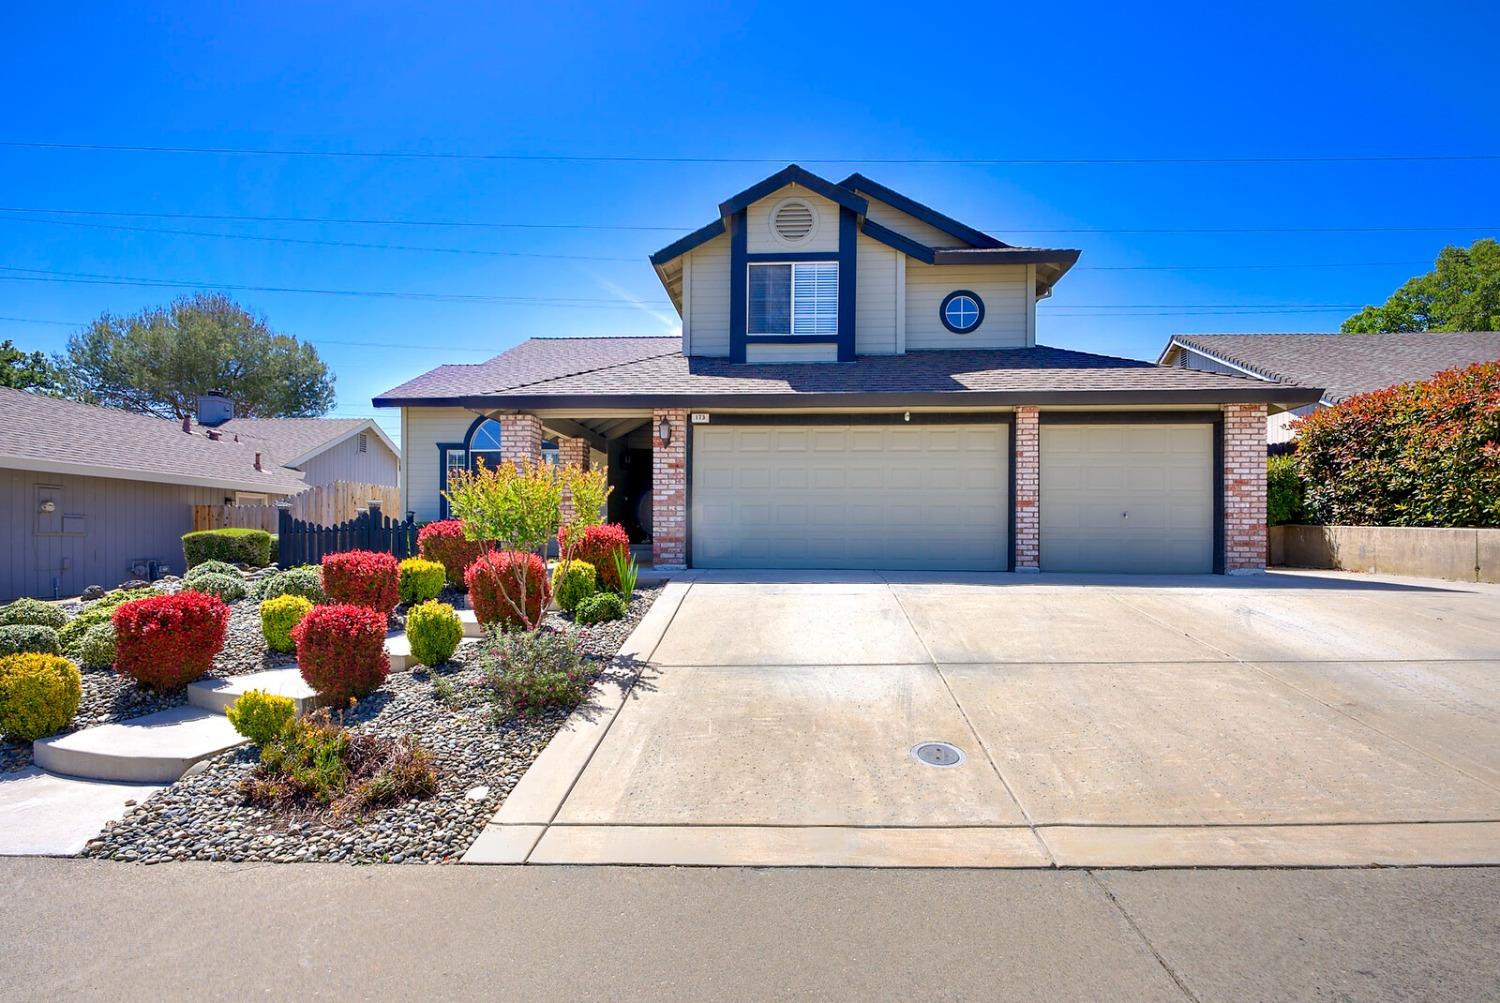 Welcome to Willow Creek Estates, an idyllic neighborhood in Folsom, offering comfort and convenience